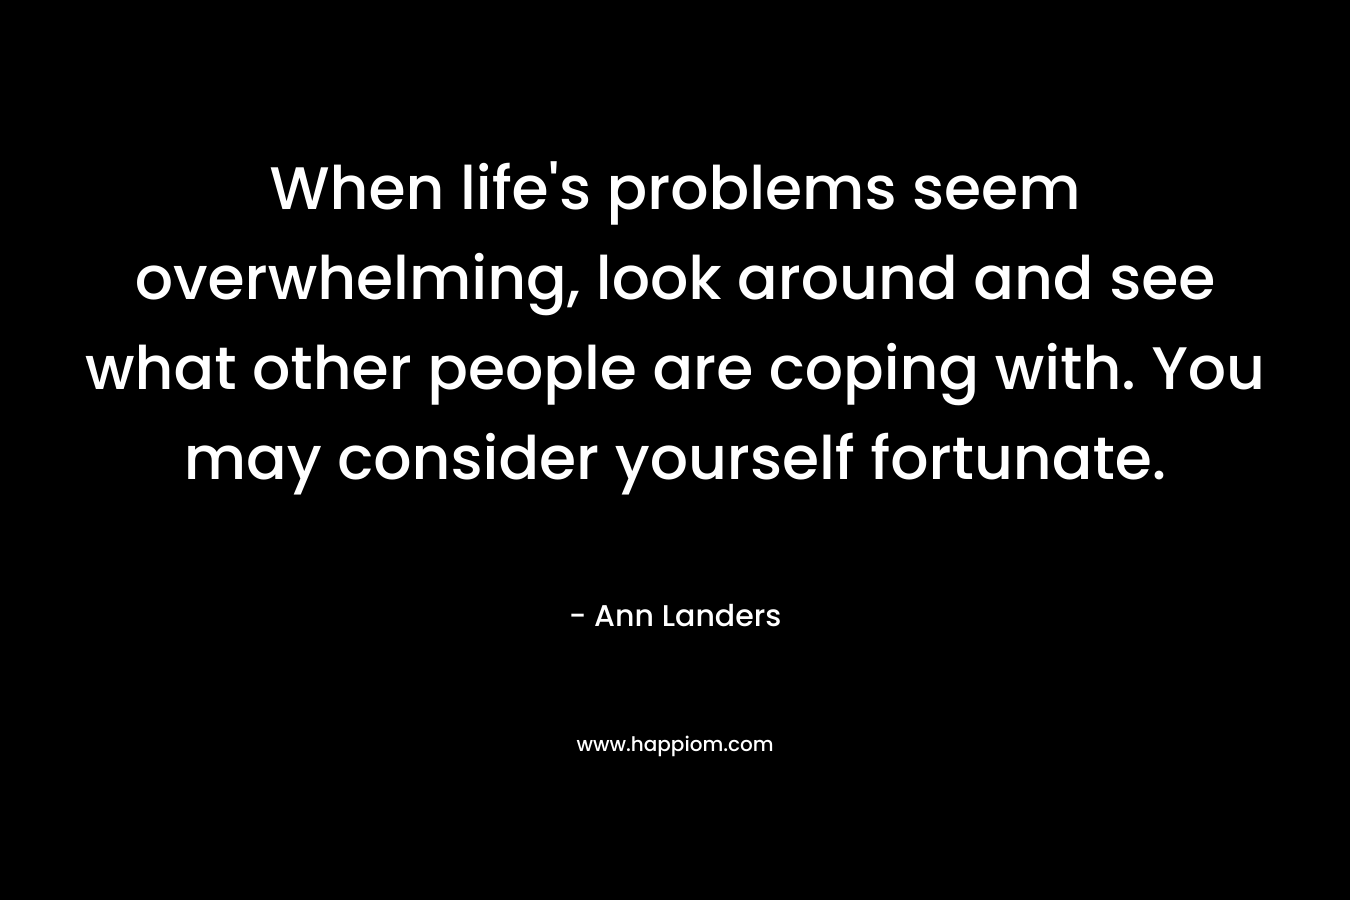 When life’s problems seem overwhelming, look around and see what other people are coping with. You may consider yourself fortunate. – Ann Landers